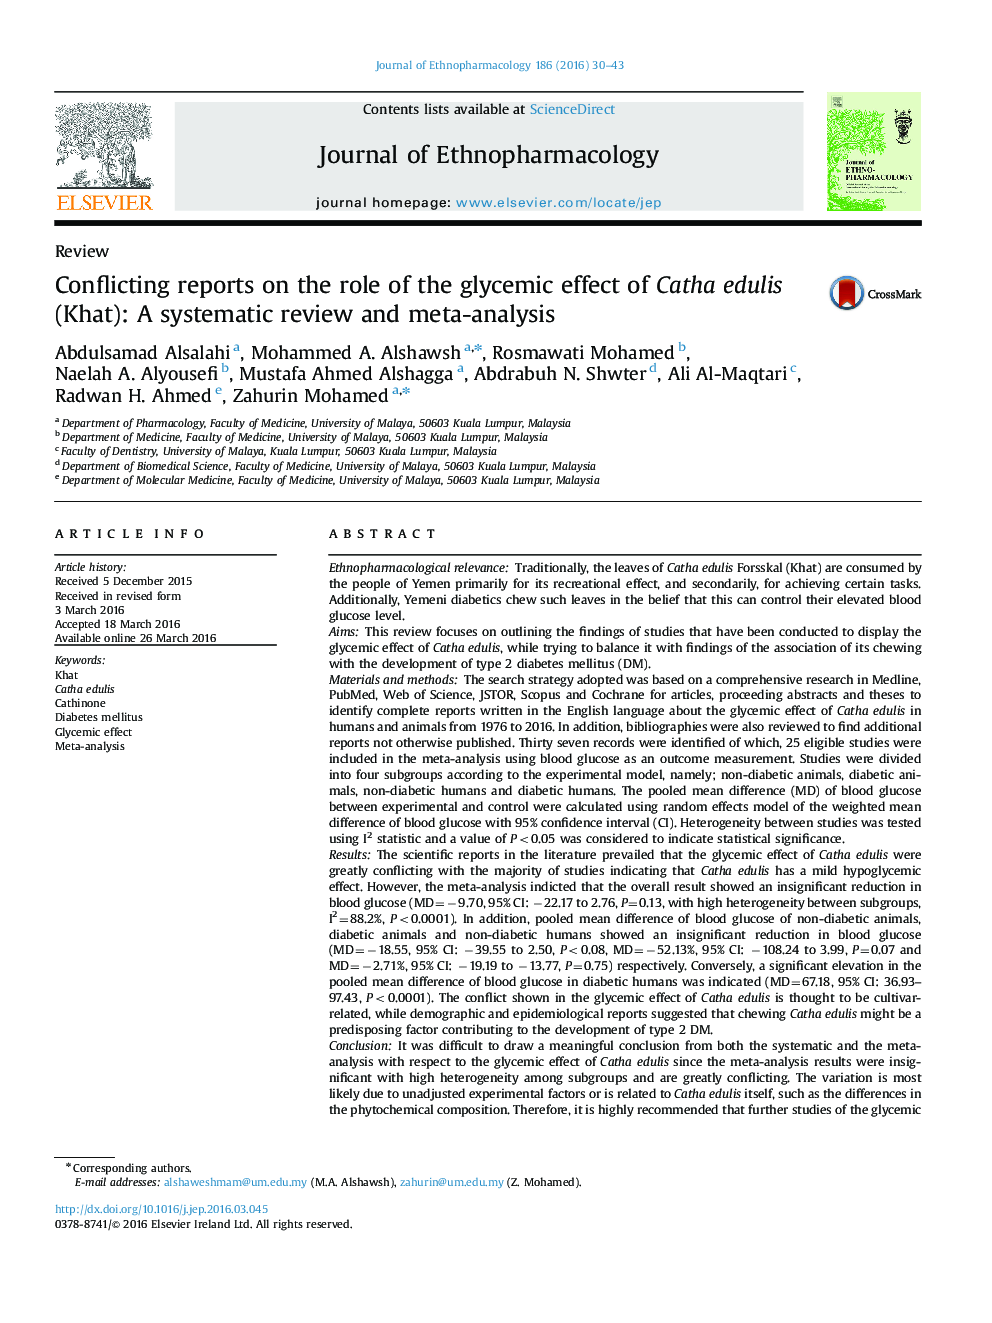 Conflicting reports on the role of the glycemic effect of Catha edulis (Khat): A systematic review and meta-analysis